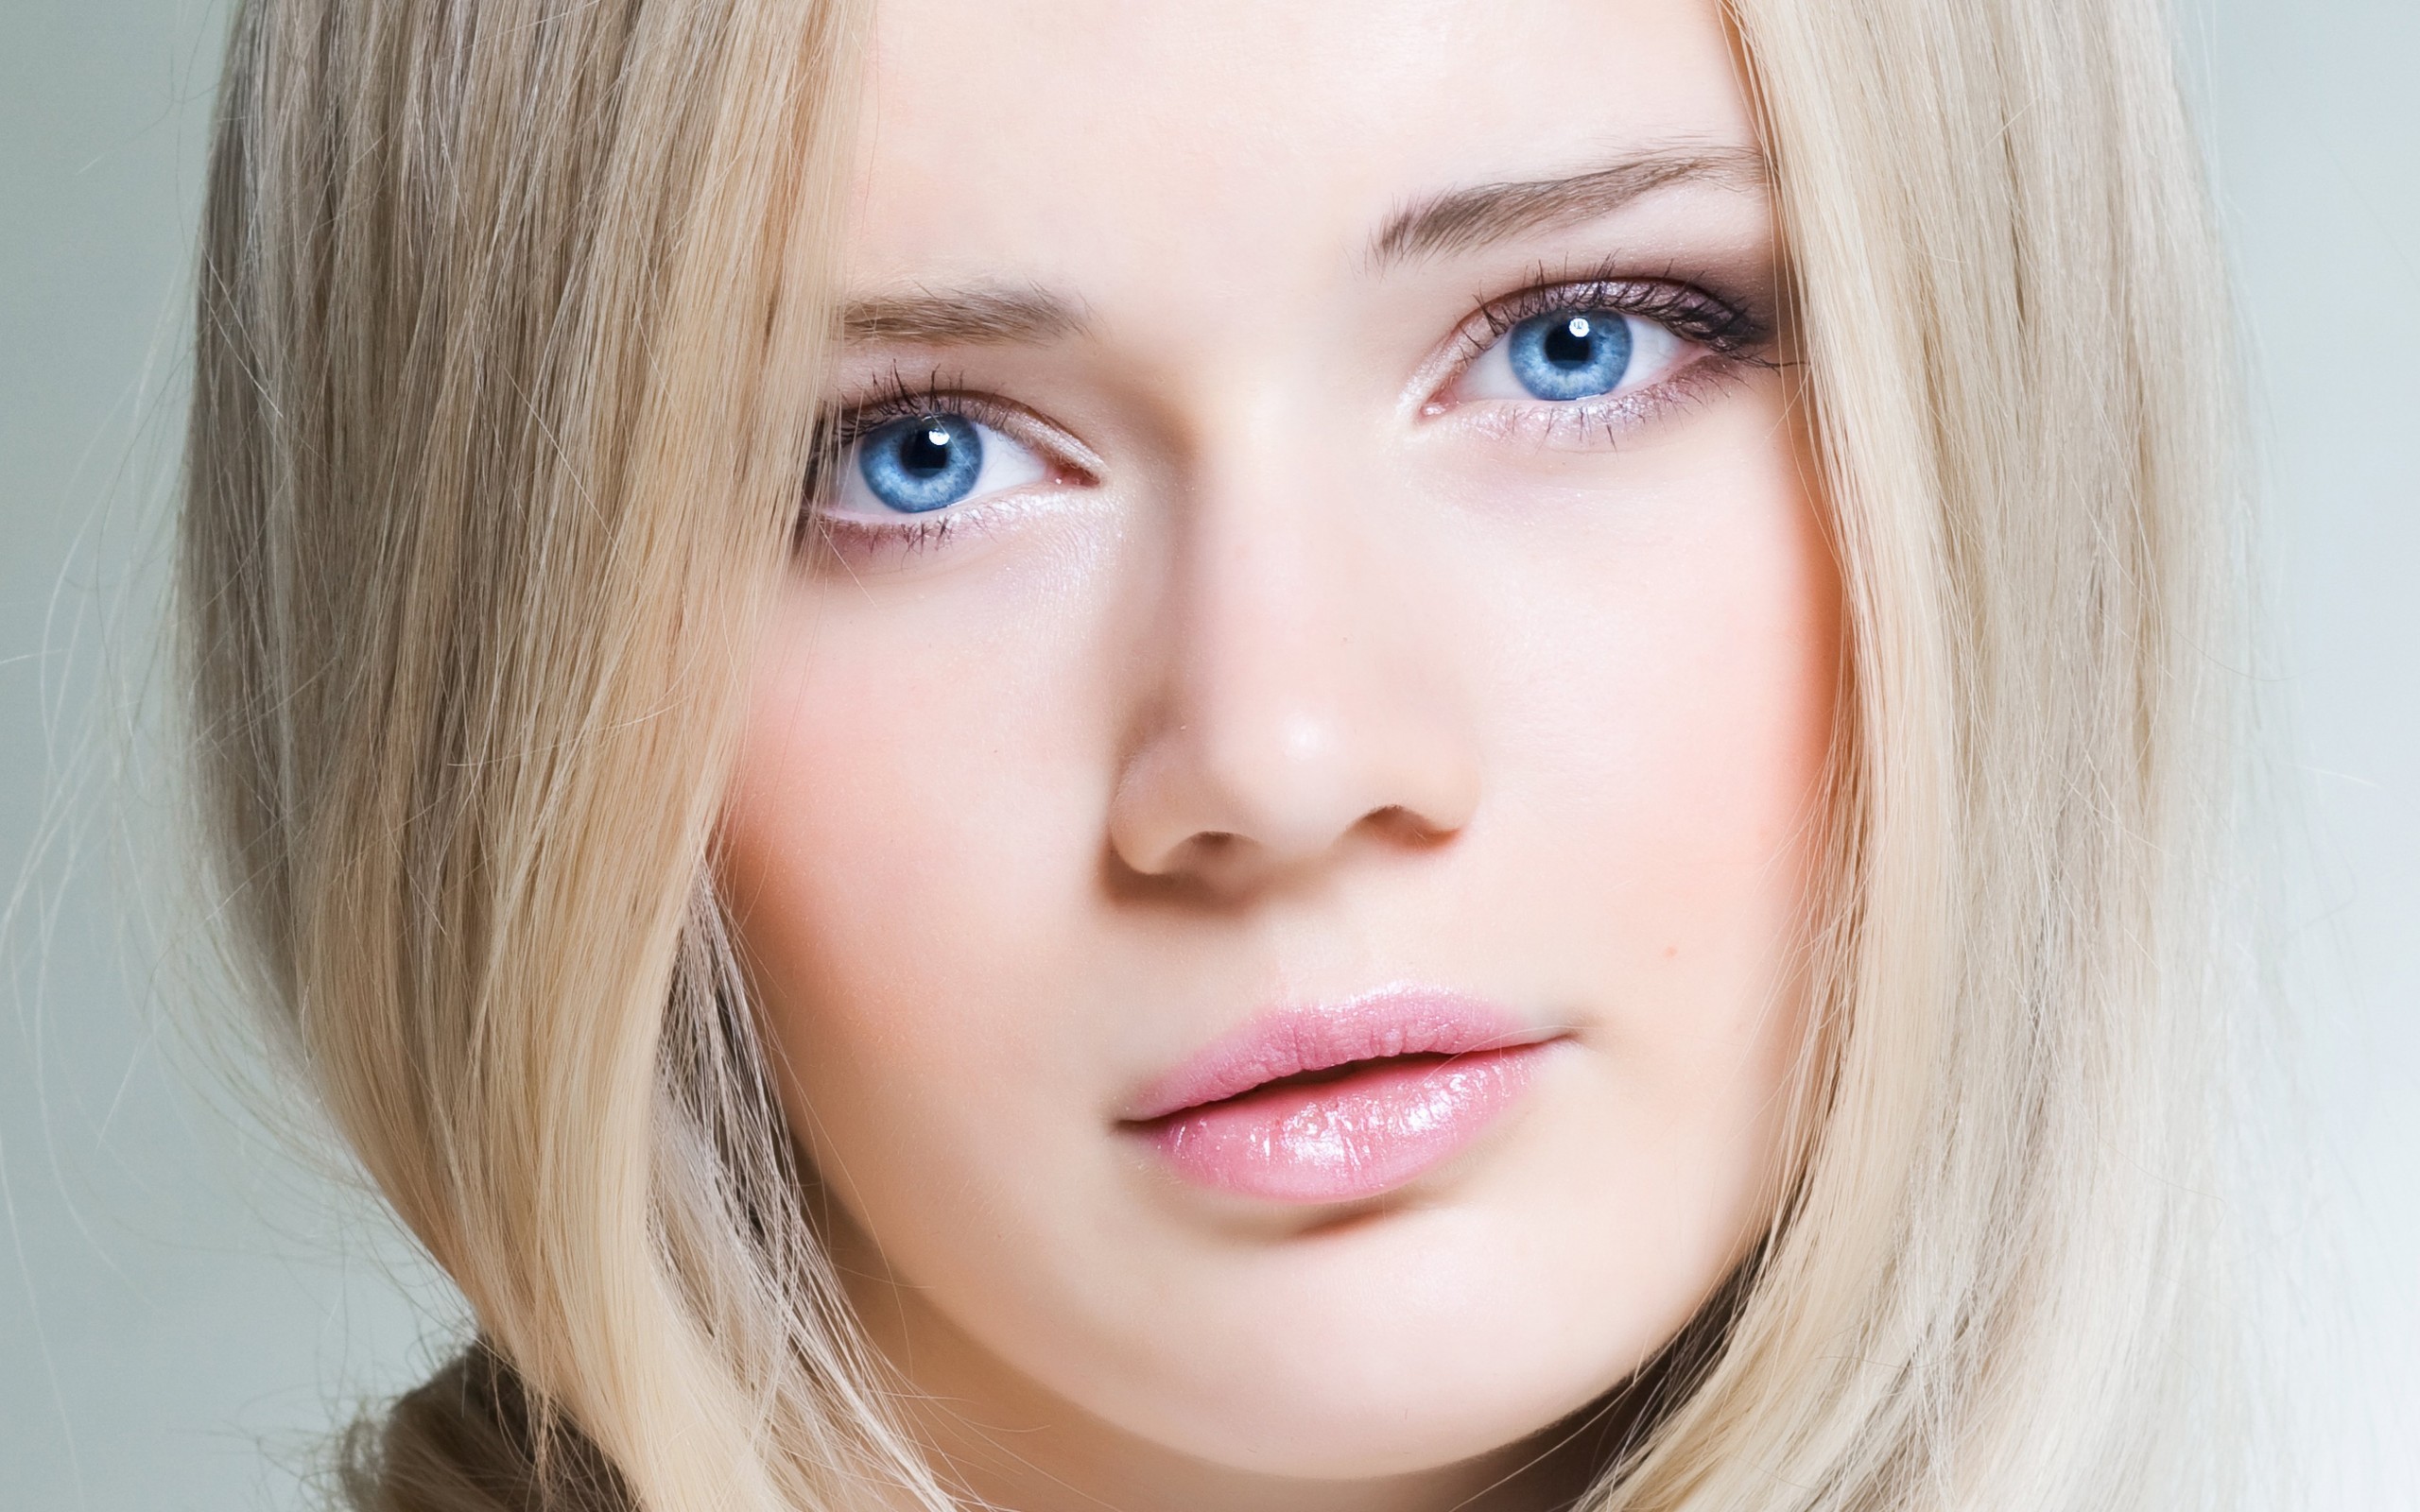 Blond Wavy Hair Girl with Blue Eyes - wide 7